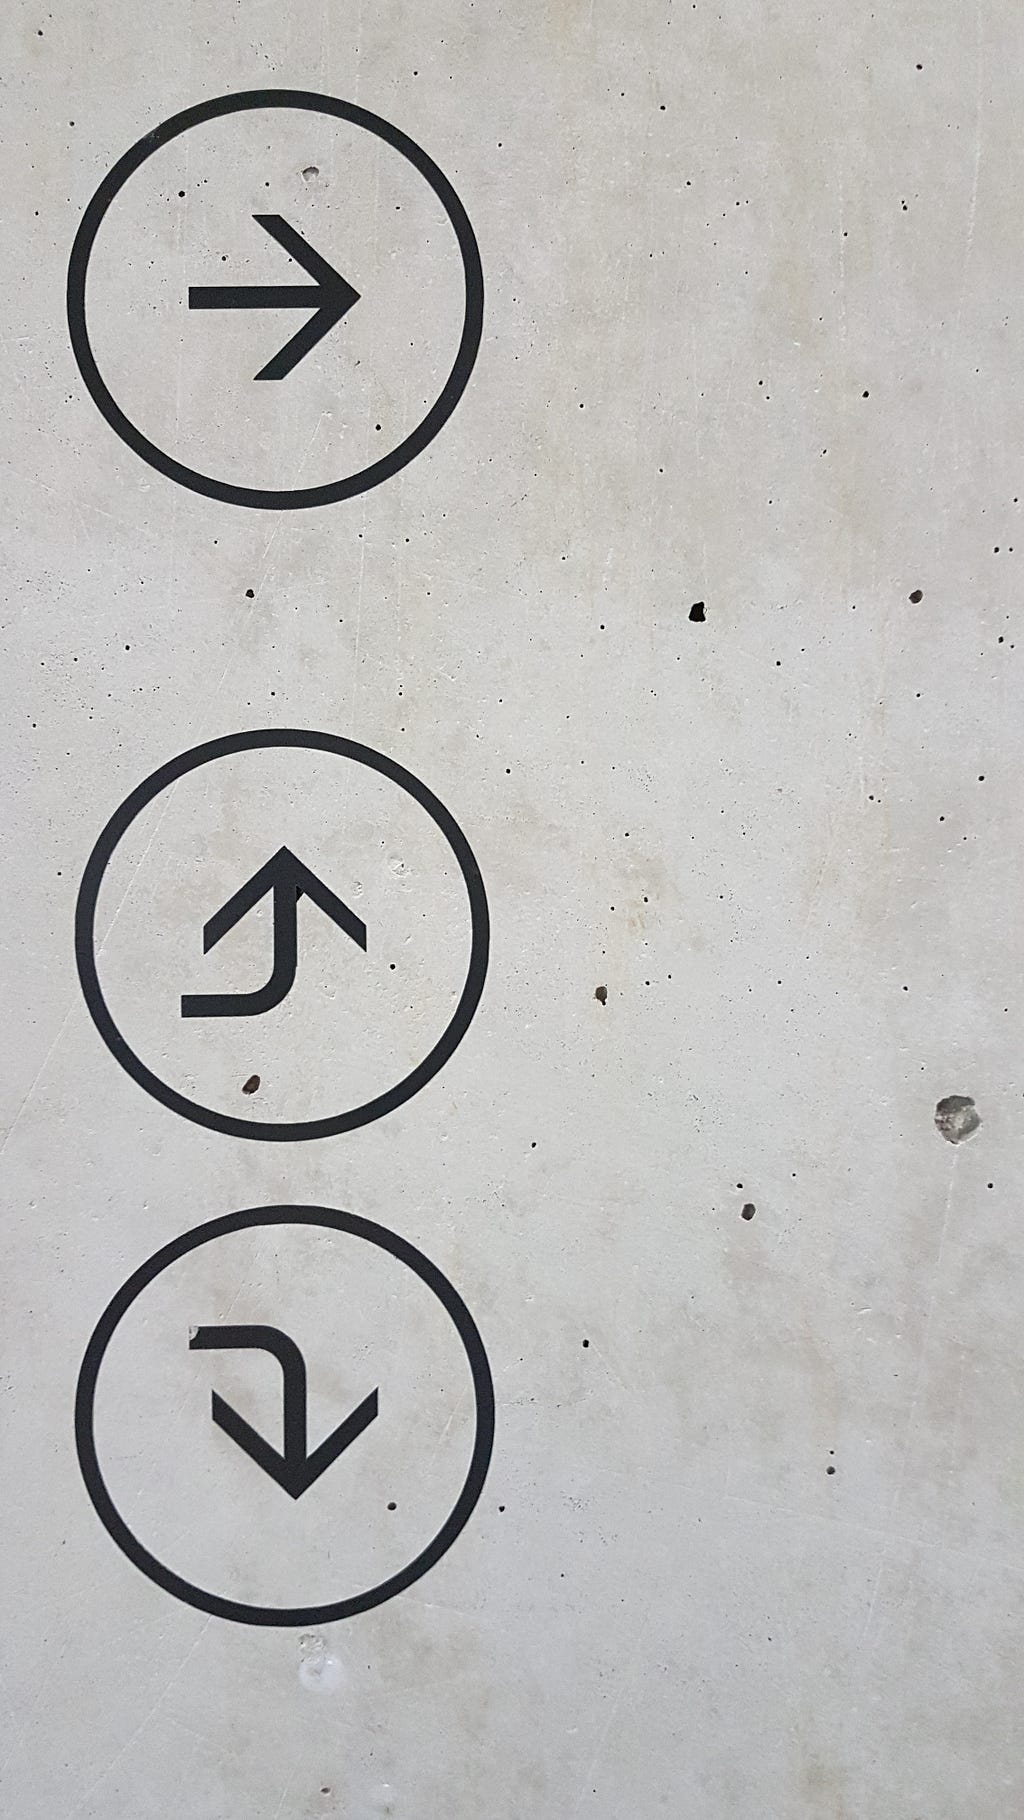 Arrows pointing to go each way, confusing the person looking at them.